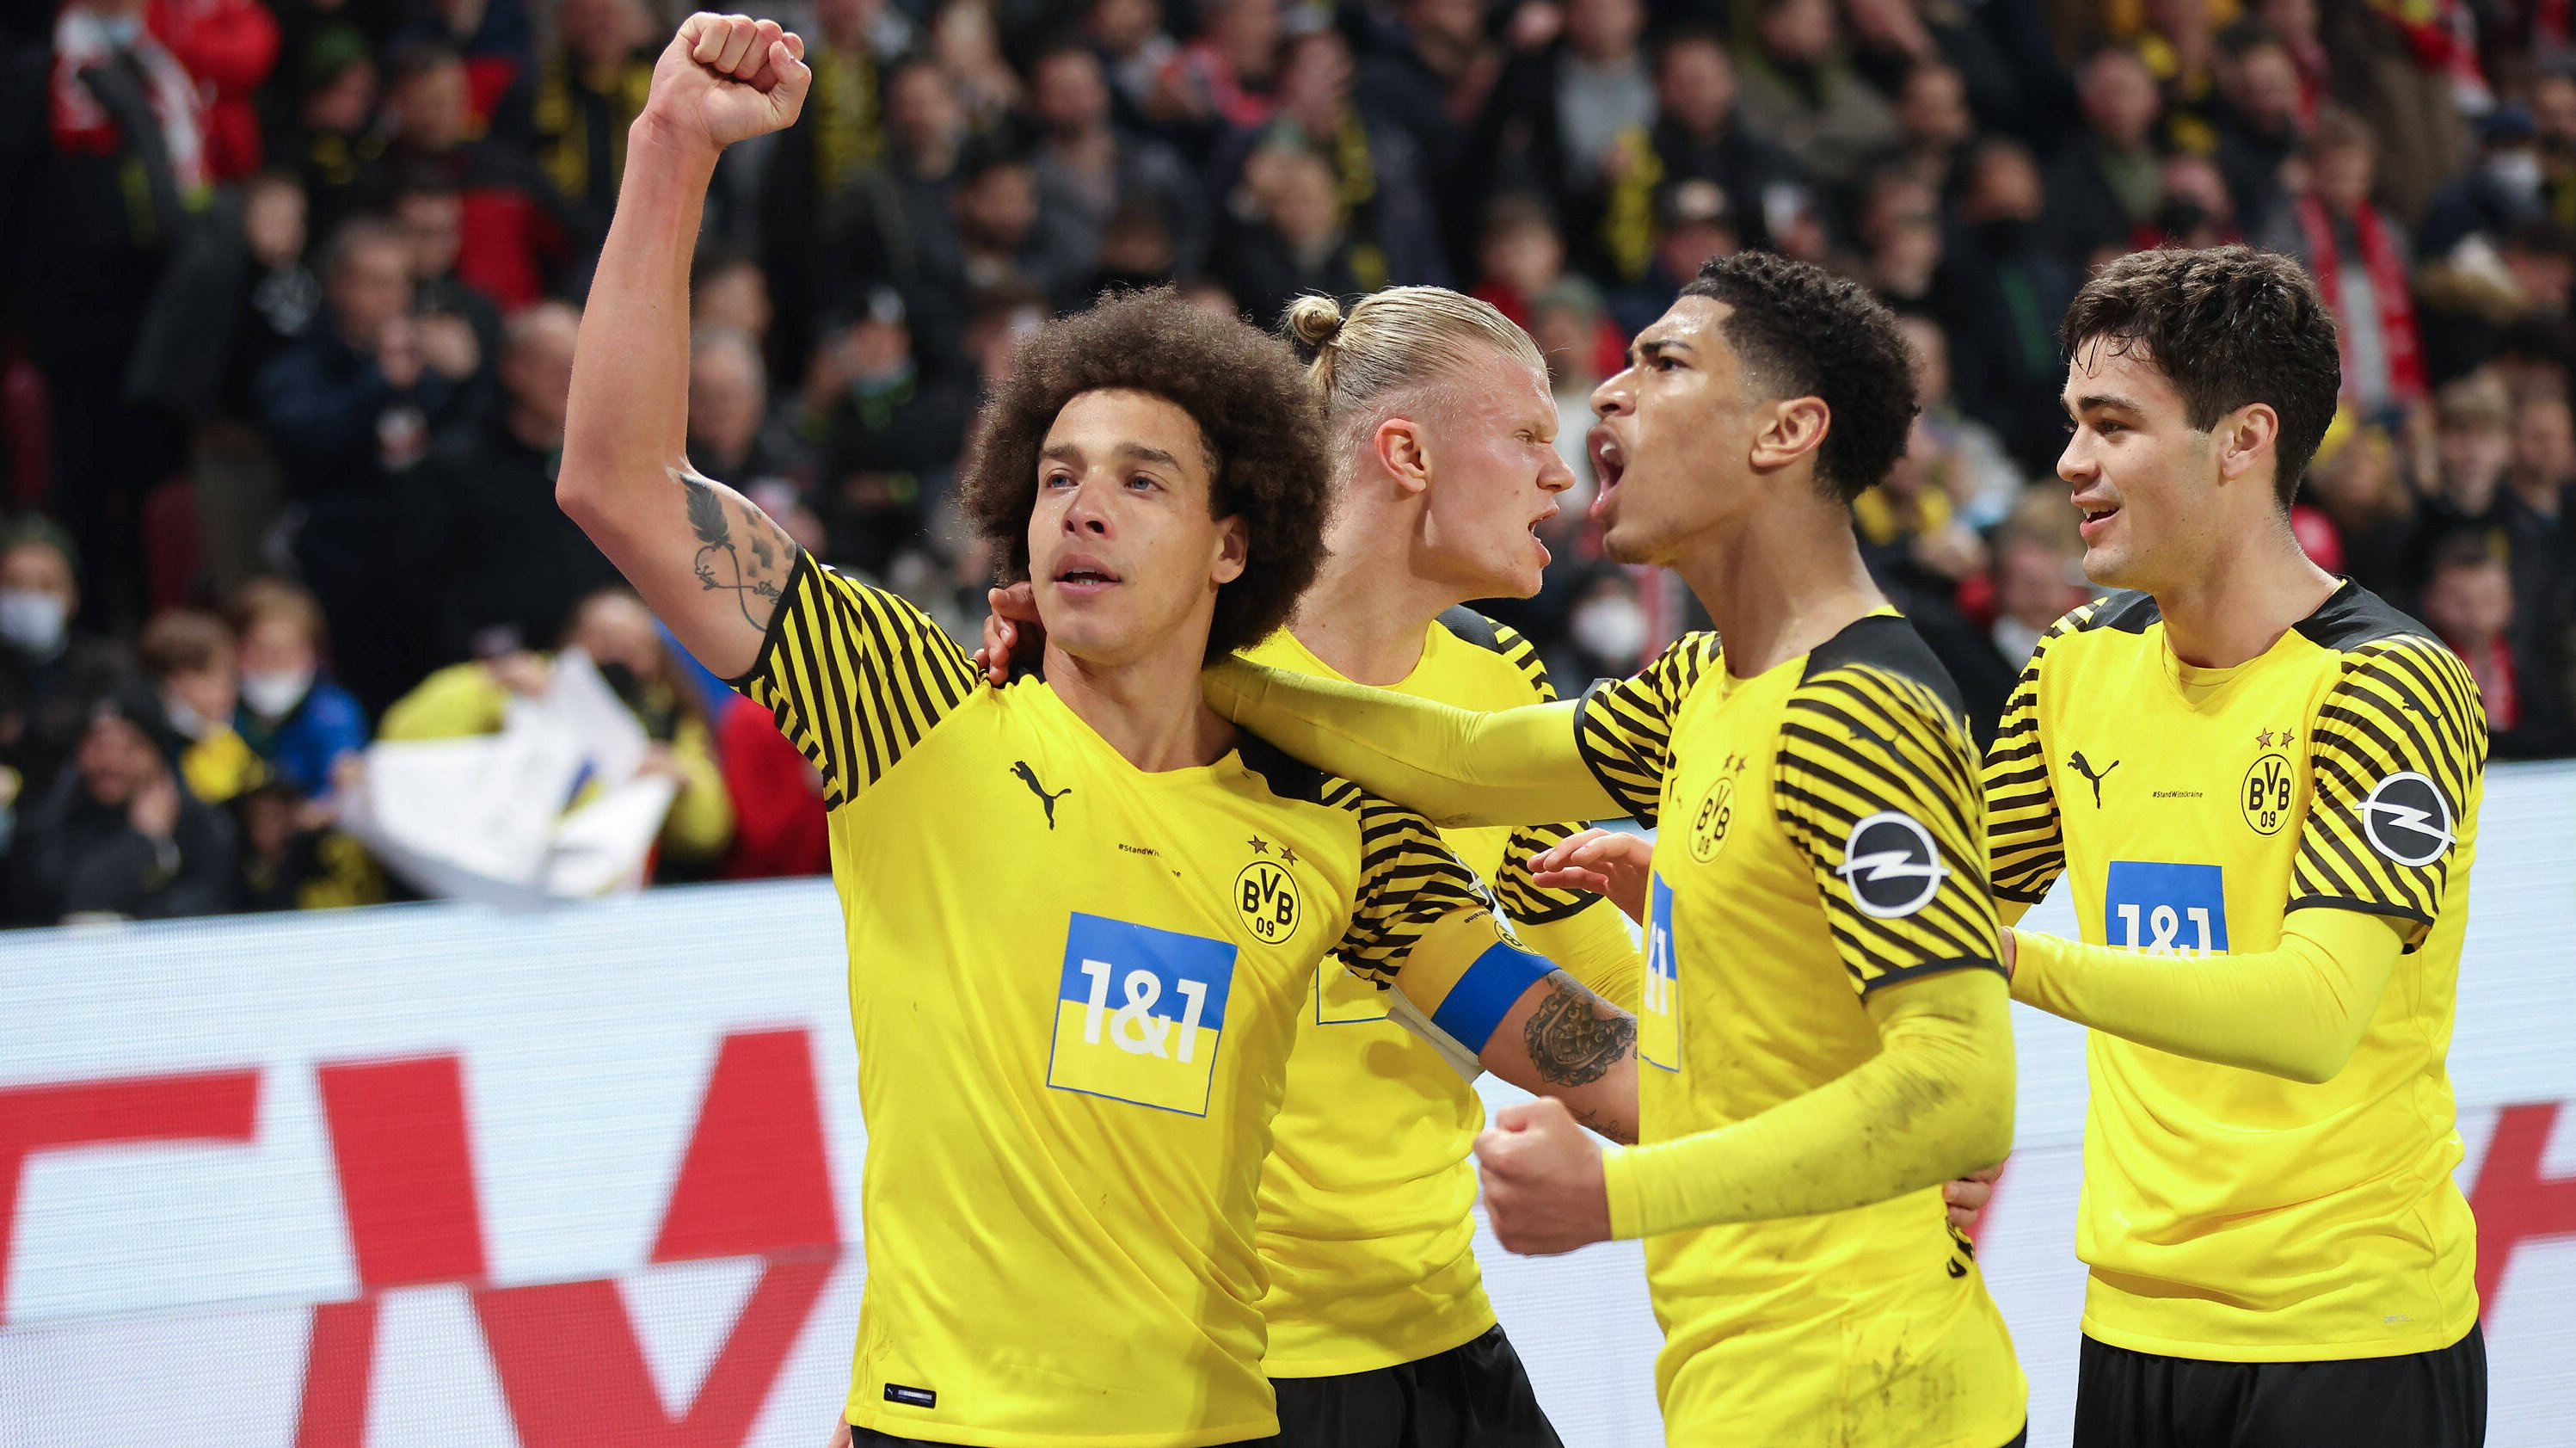 Atletico Madrid set to sign Axel Witsel from Borussia Dortmund on free transfer